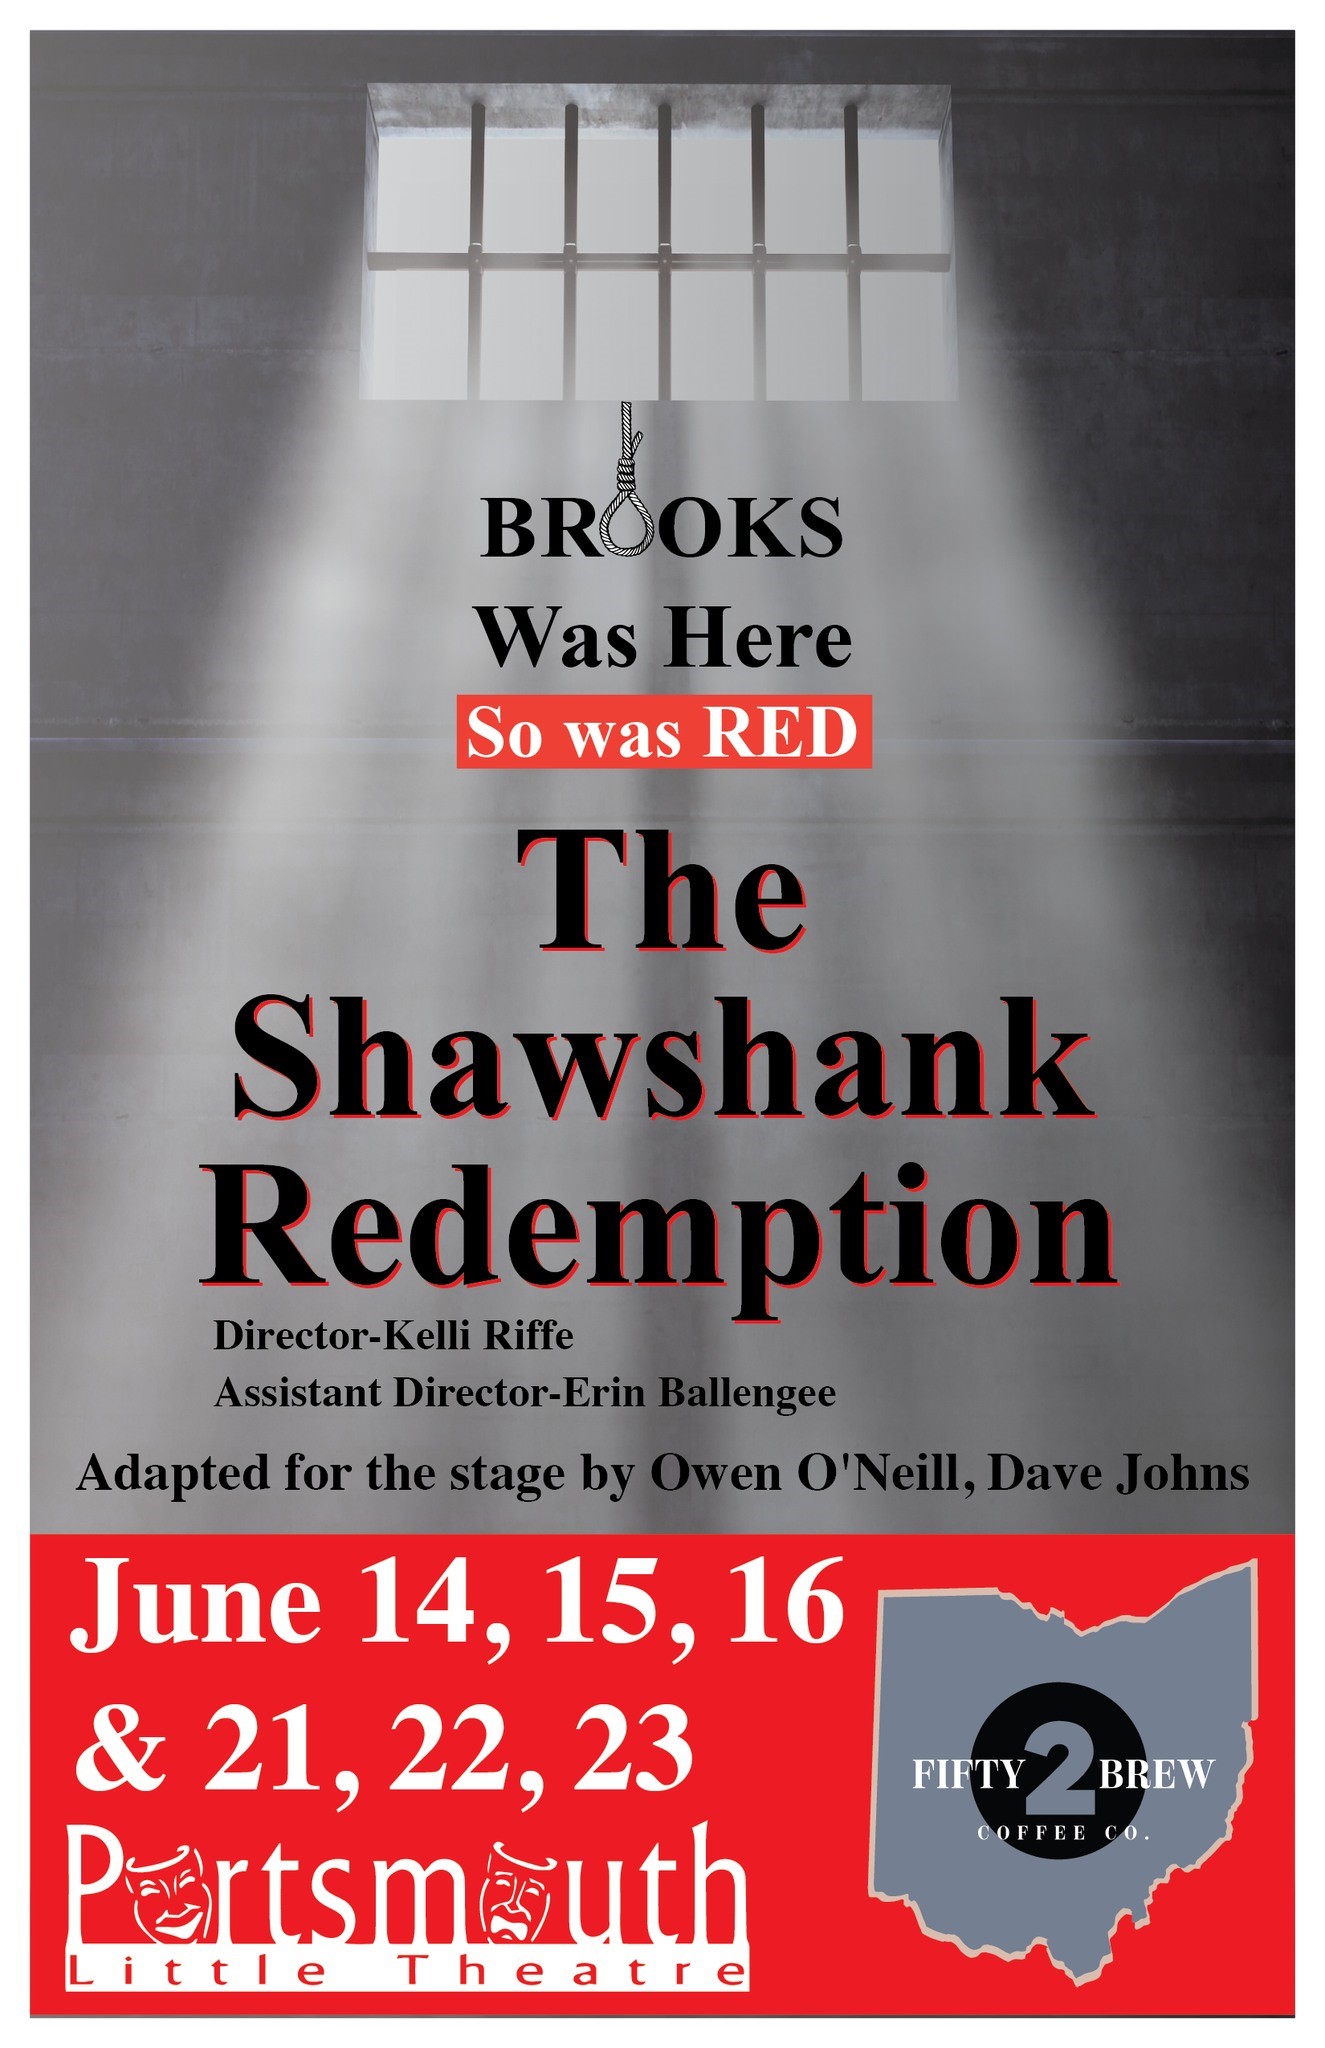 The Shawshank Redemption  on Jun 23, 14:00@Portsmouth Little Theatre - Pick a seat, Buy tickets and Get information on Portsmouth Little Theatre 